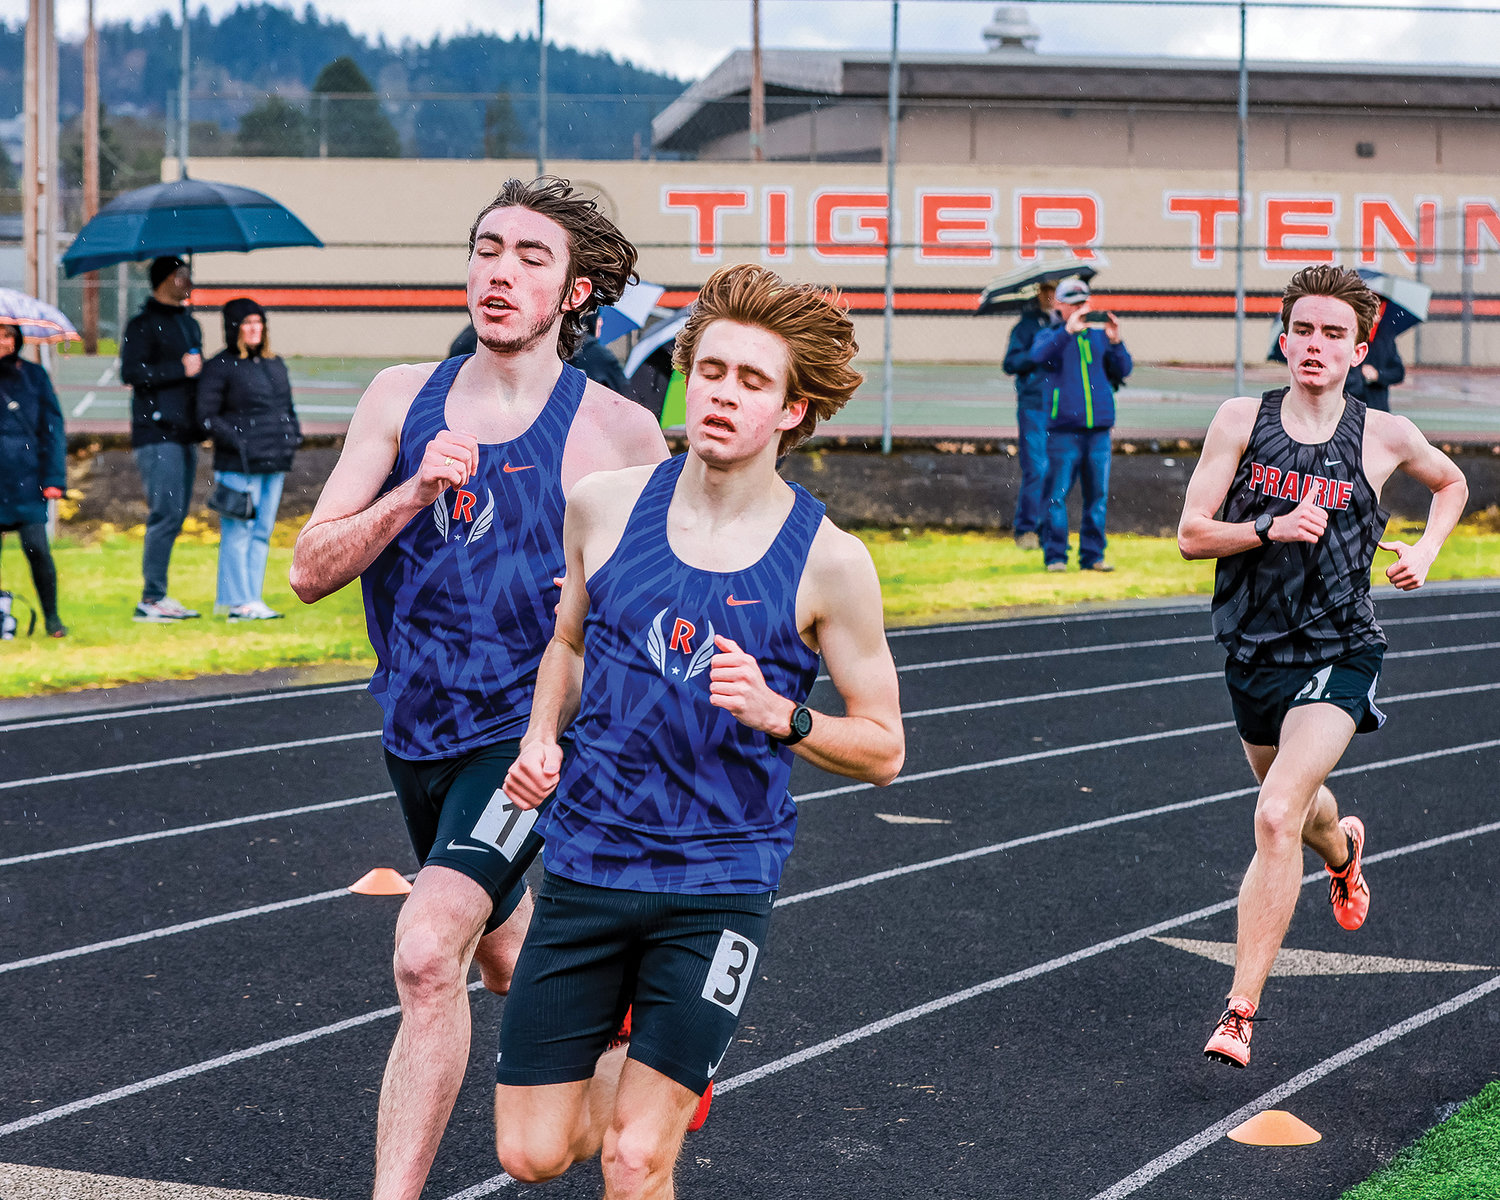 Ridgefield senior Liam Rapp, left, and sophomore Davis Sullivan, right, run during the 1600-meter race at the Tiger Invite at Battle Ground High School on Saturday, March 25.